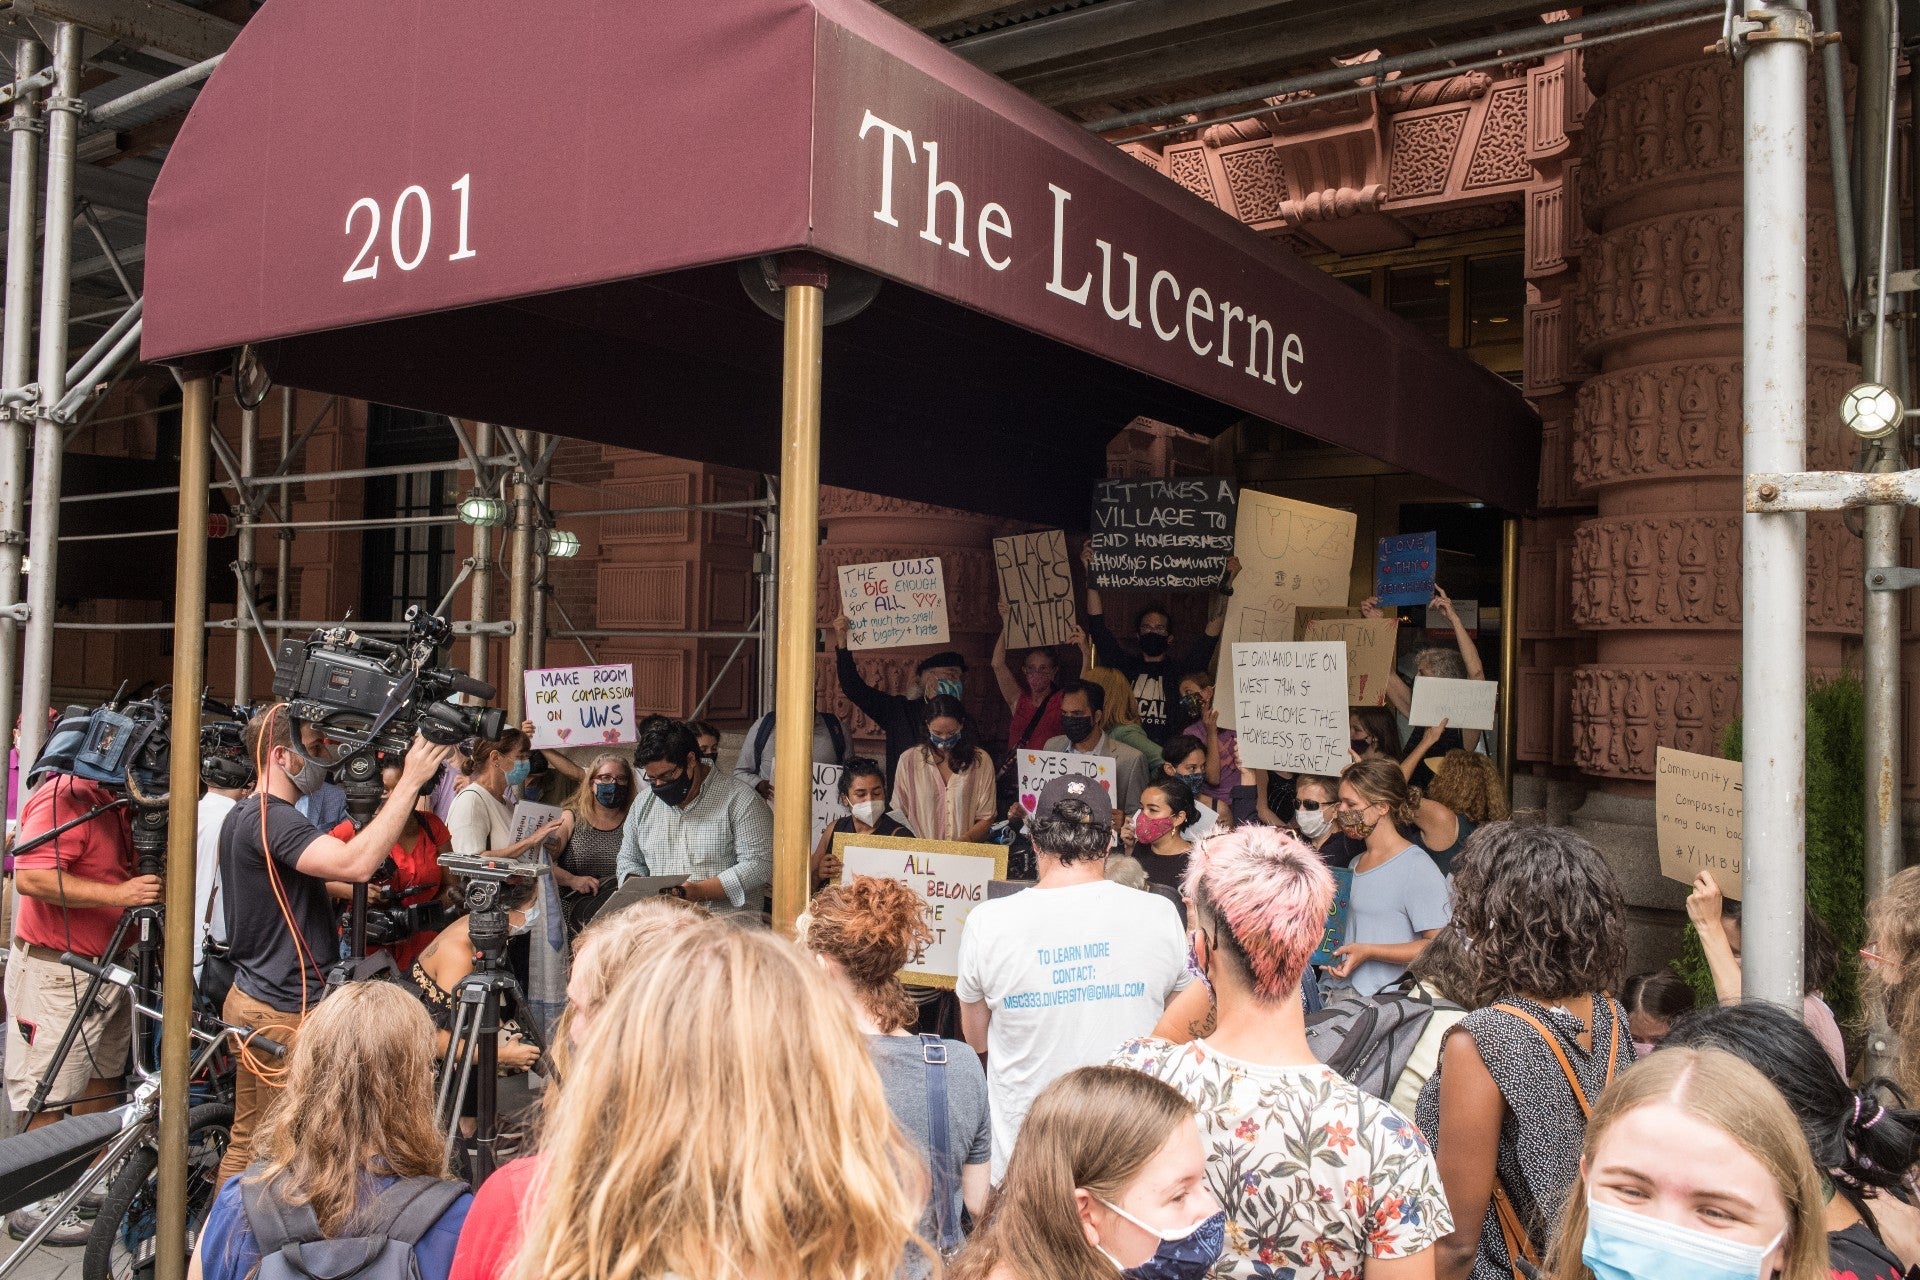 Protesters stand beneath and around an awning that says Lucerne.